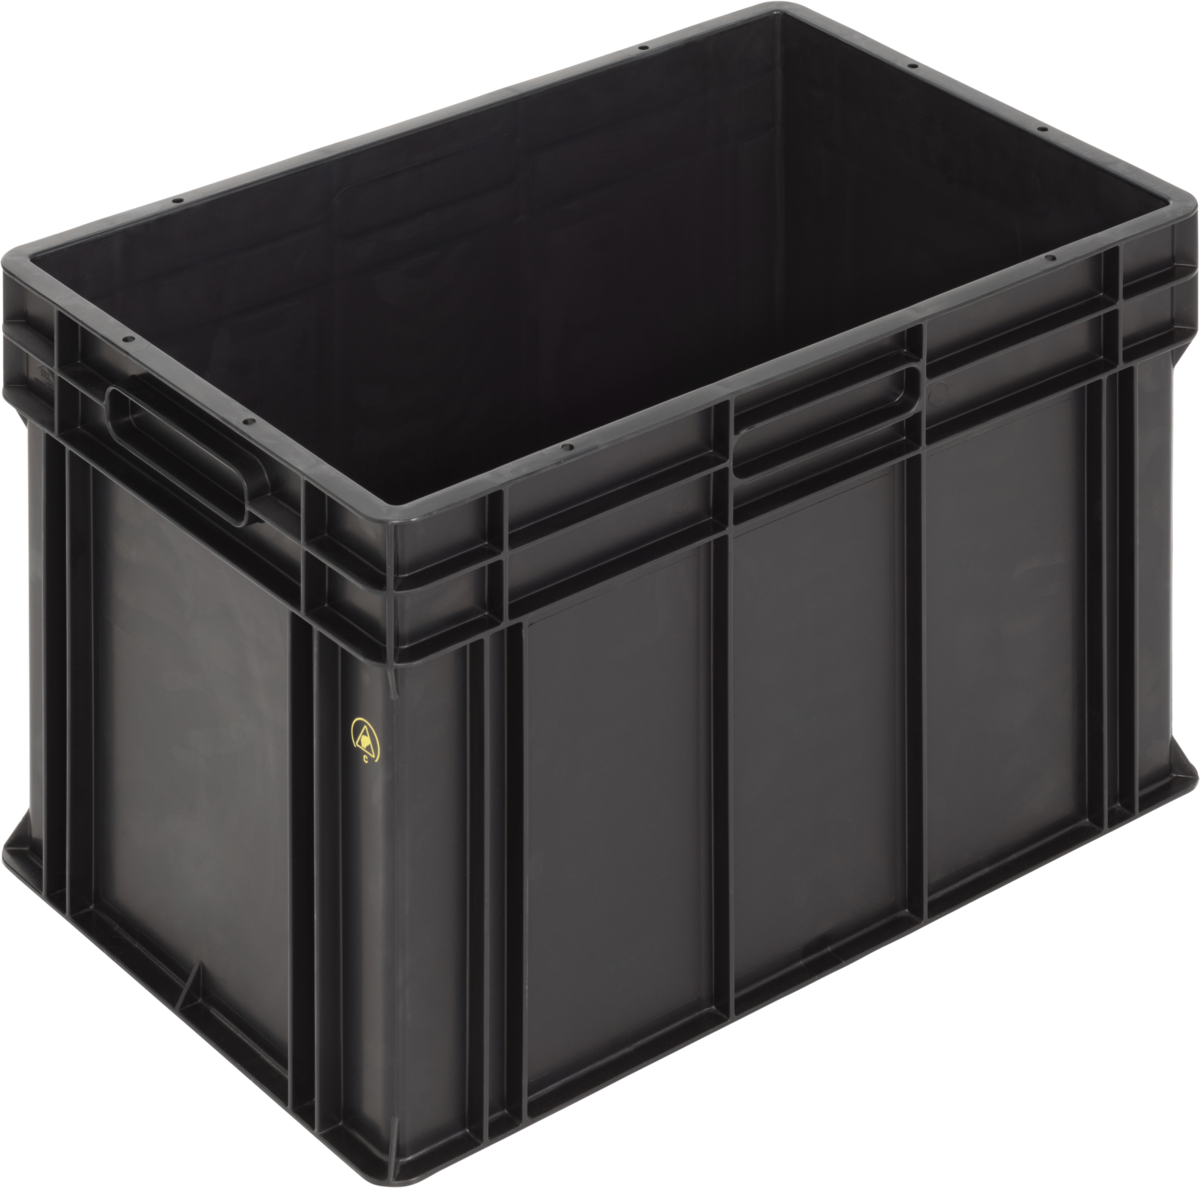 Anti-Static-ESD-Antistatic-Safe-SGL-Norm-Stacking-Bin-Containers-SGL-Base-Ref.-6440.000.992_1004528_600x400x412_01